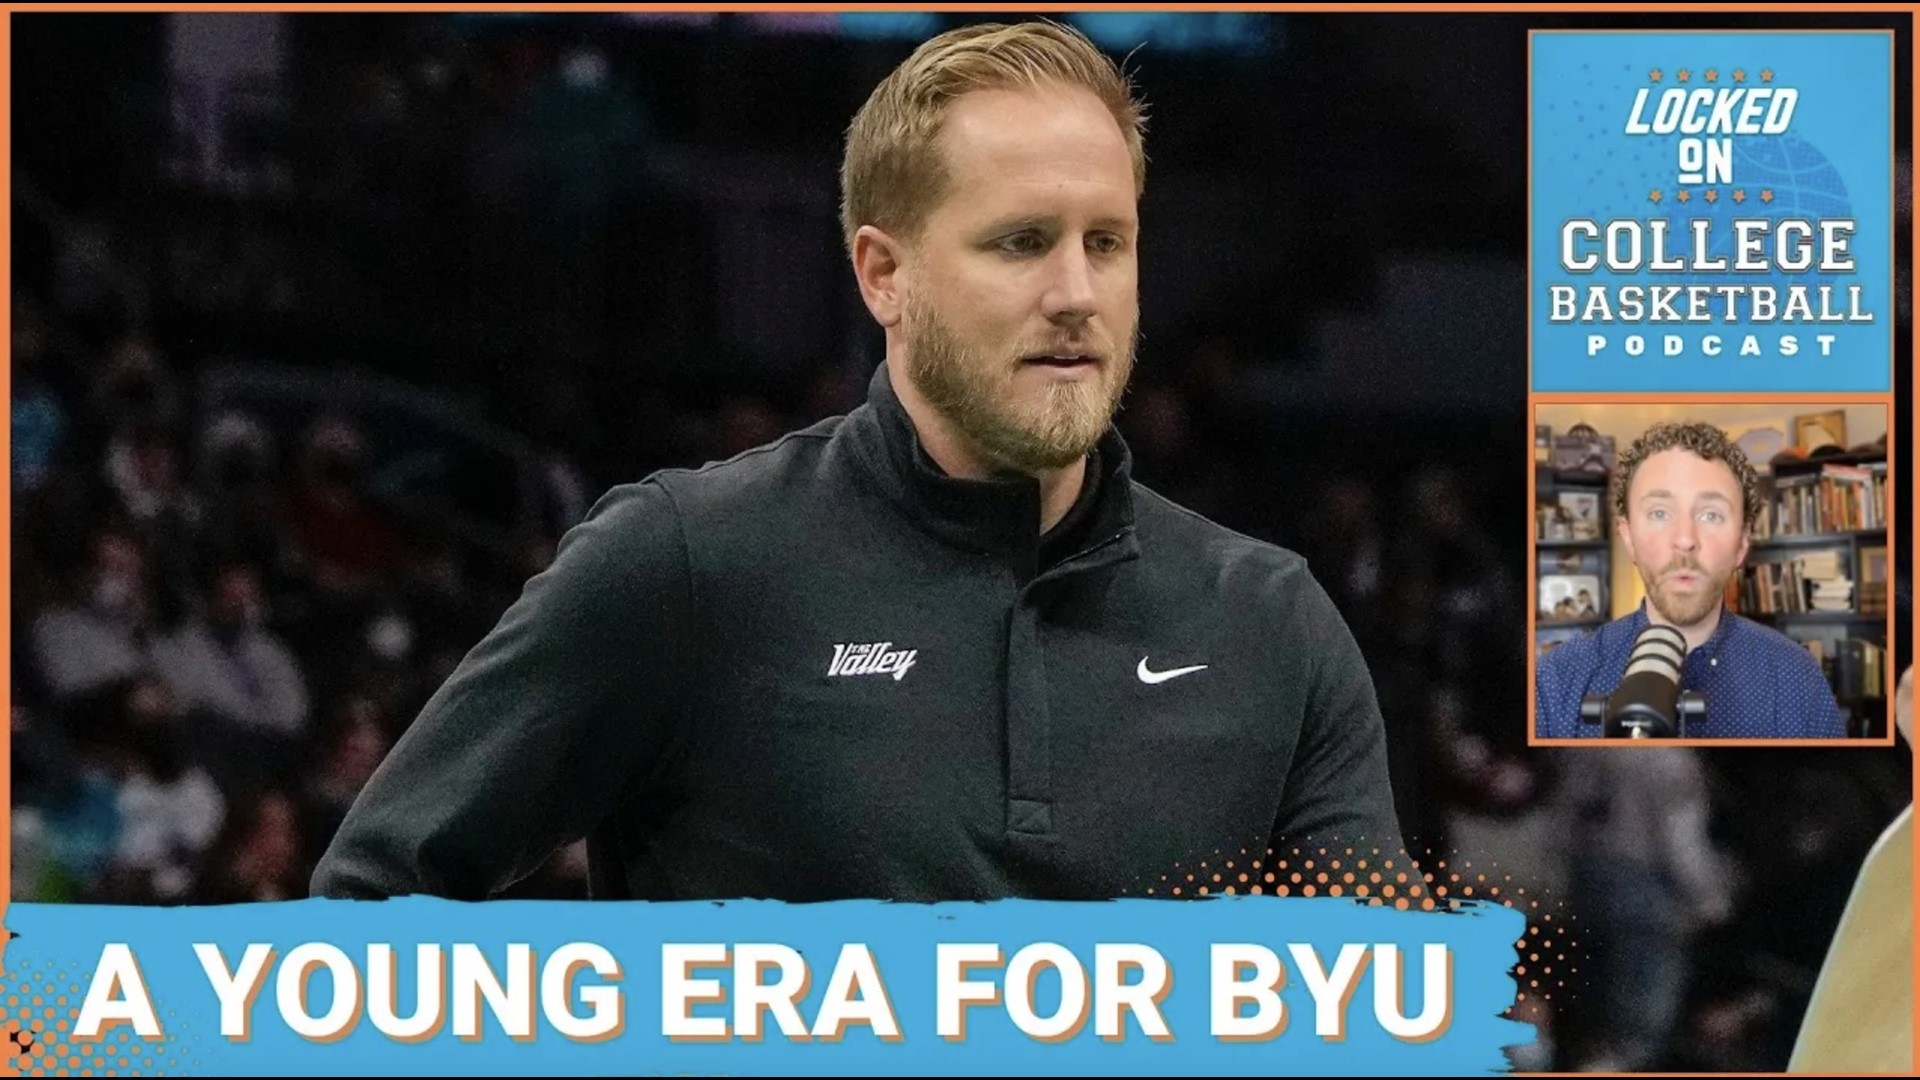 BYU hired Kevin Young from the Phoenix Suns at a faster-than-normal pace. Because of his NBA ties, it’s hard to know what to expect moving forward for the Cougars.